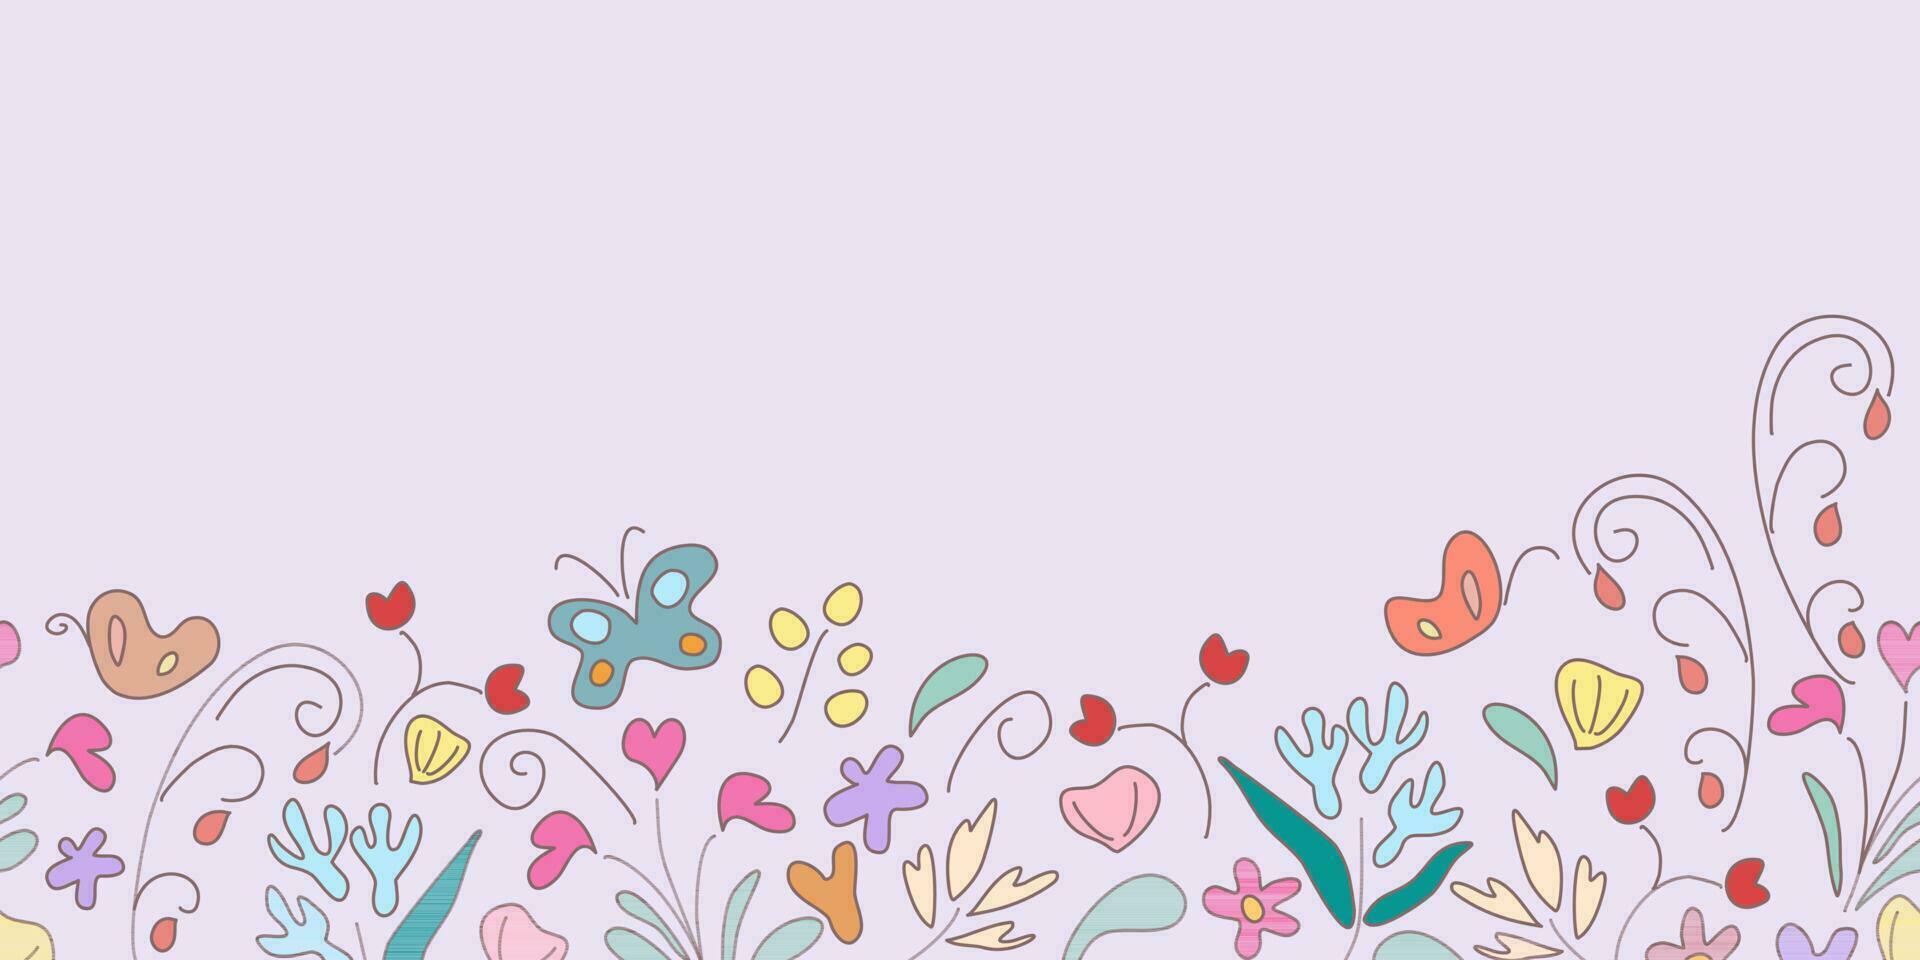 Floral border background banner frame vector illustration for Mothers day, fathers day, valentines, spring, summer, anniversary template decoration for specials day. Seamless doodle design.